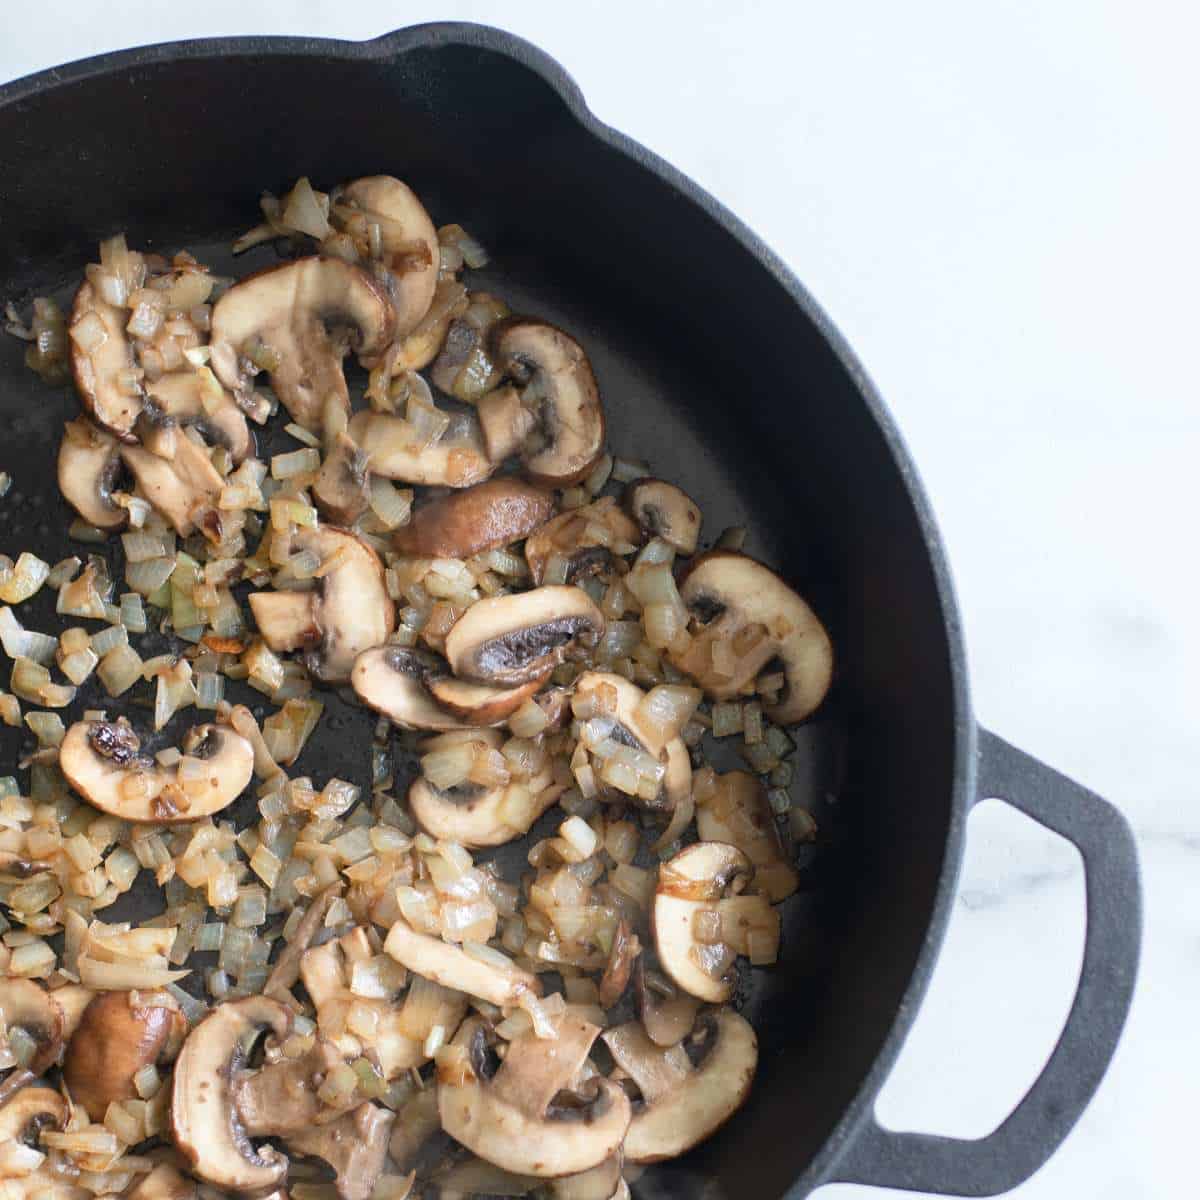 Cut onion and mushroom frying in an a cast iron skillet.